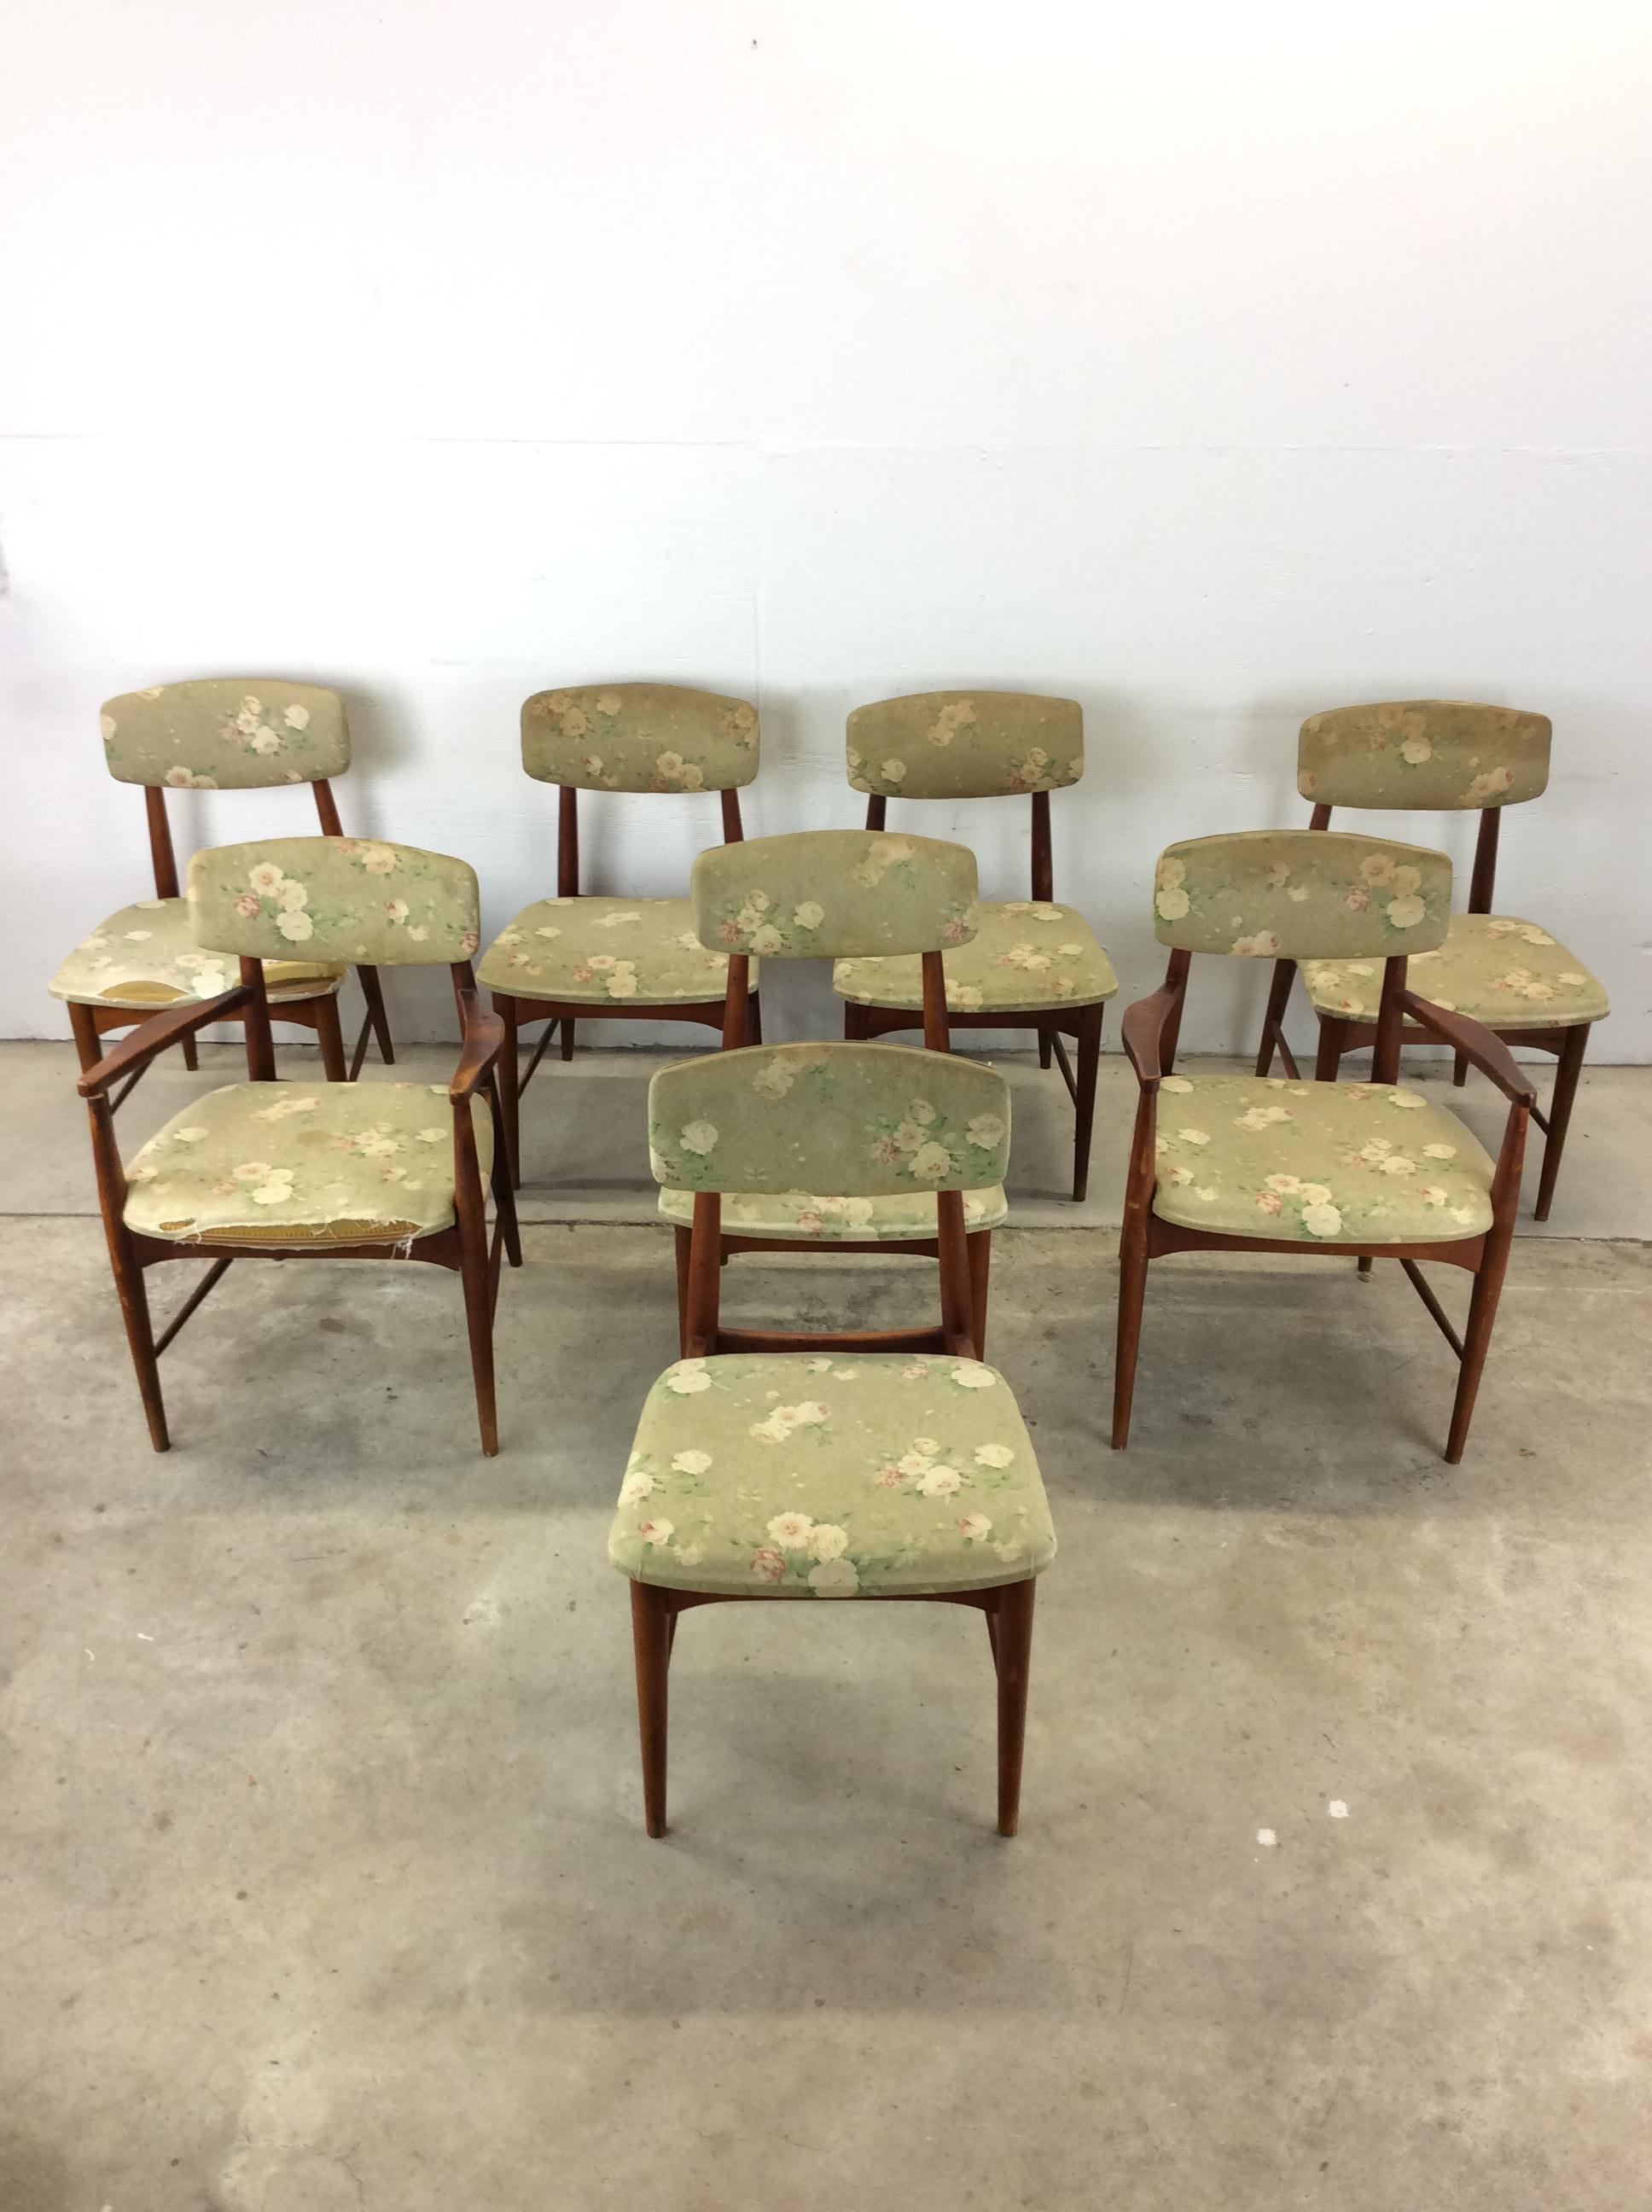 20th Century Set of 8 Mid Century Modern Dining Room Chairs with Vintage Upholstery